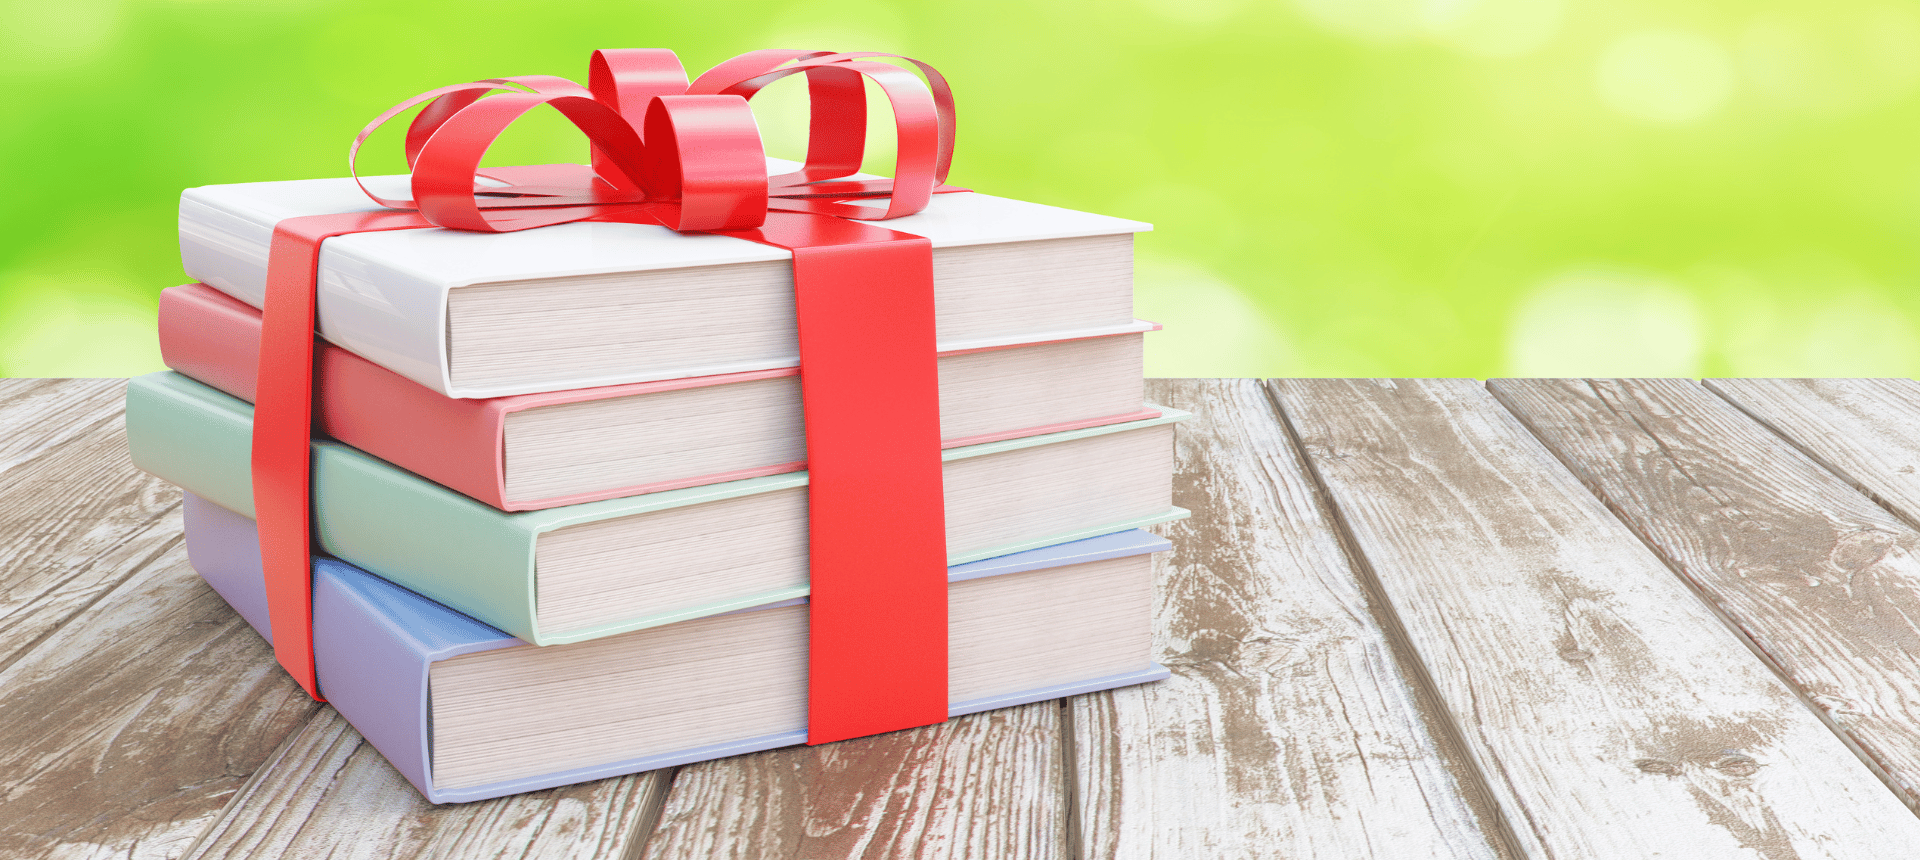 Stuck for Gift Ideas? 6 Ways to Give the Gift of Learning